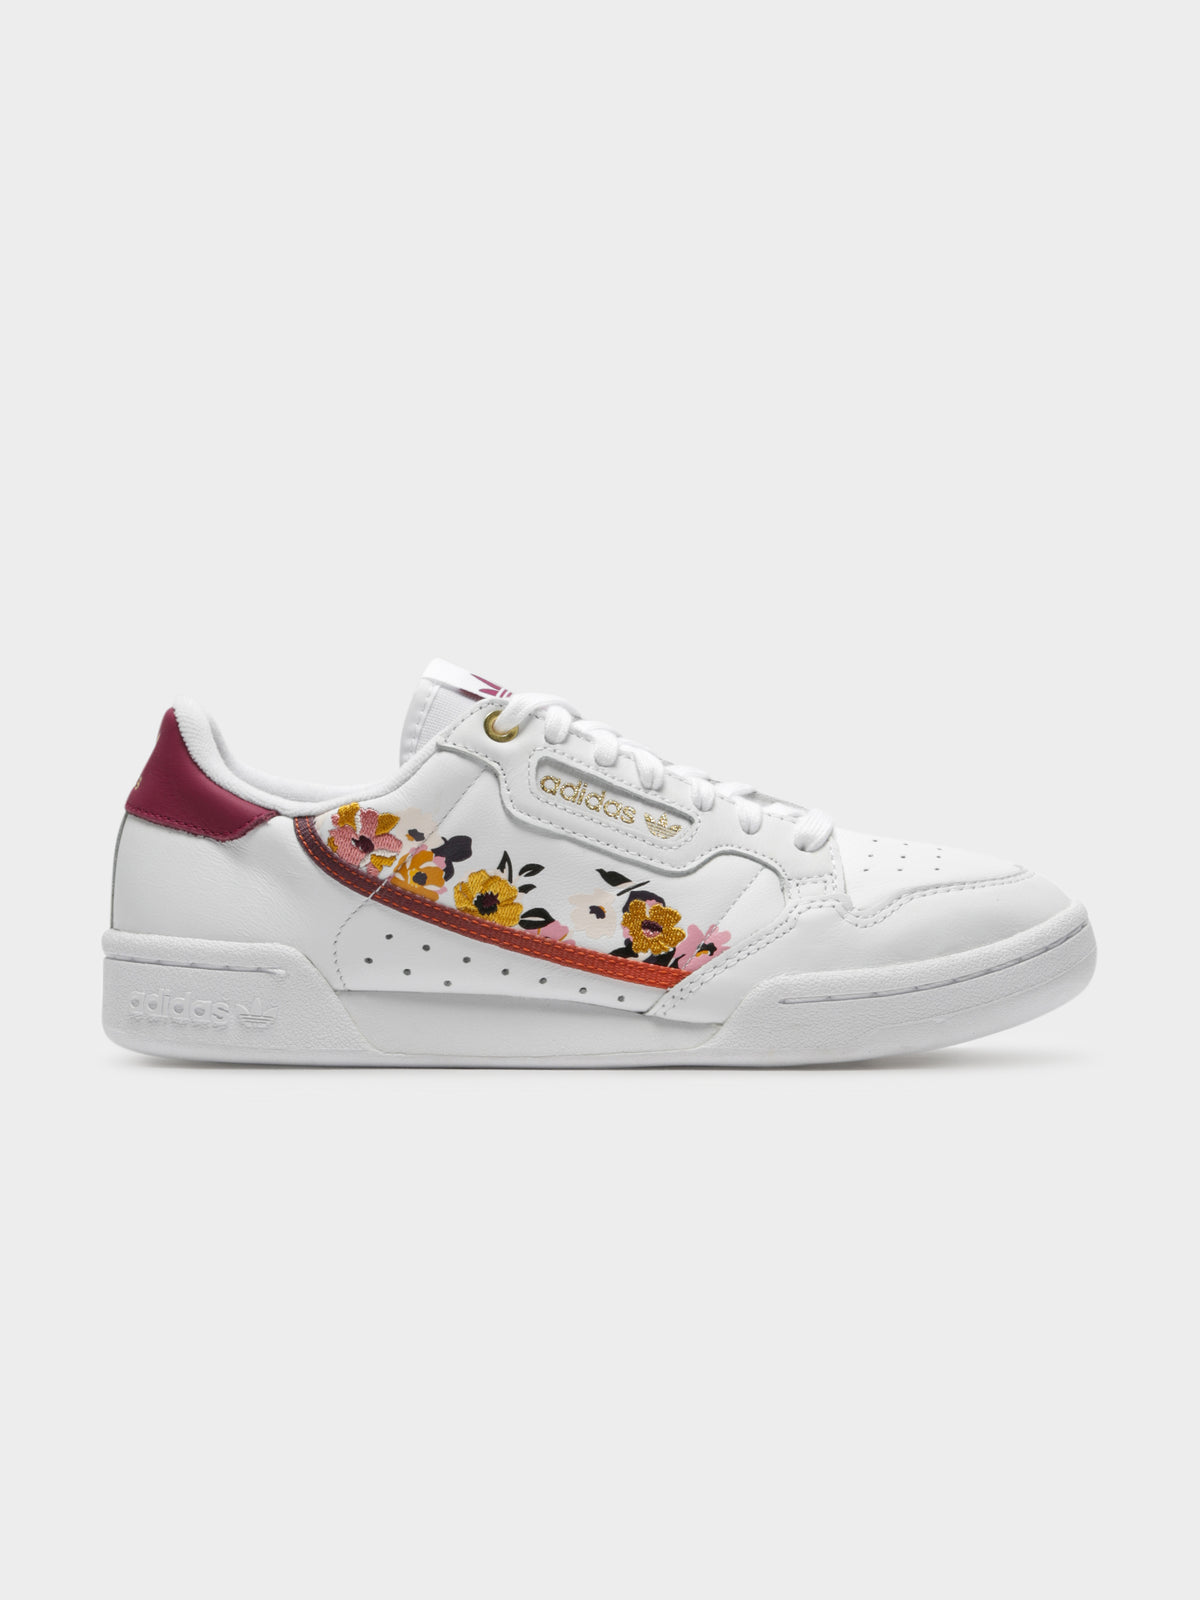 Womens Continental 80 Sneakers in Cloud White / Power Berry / Gold Metallic